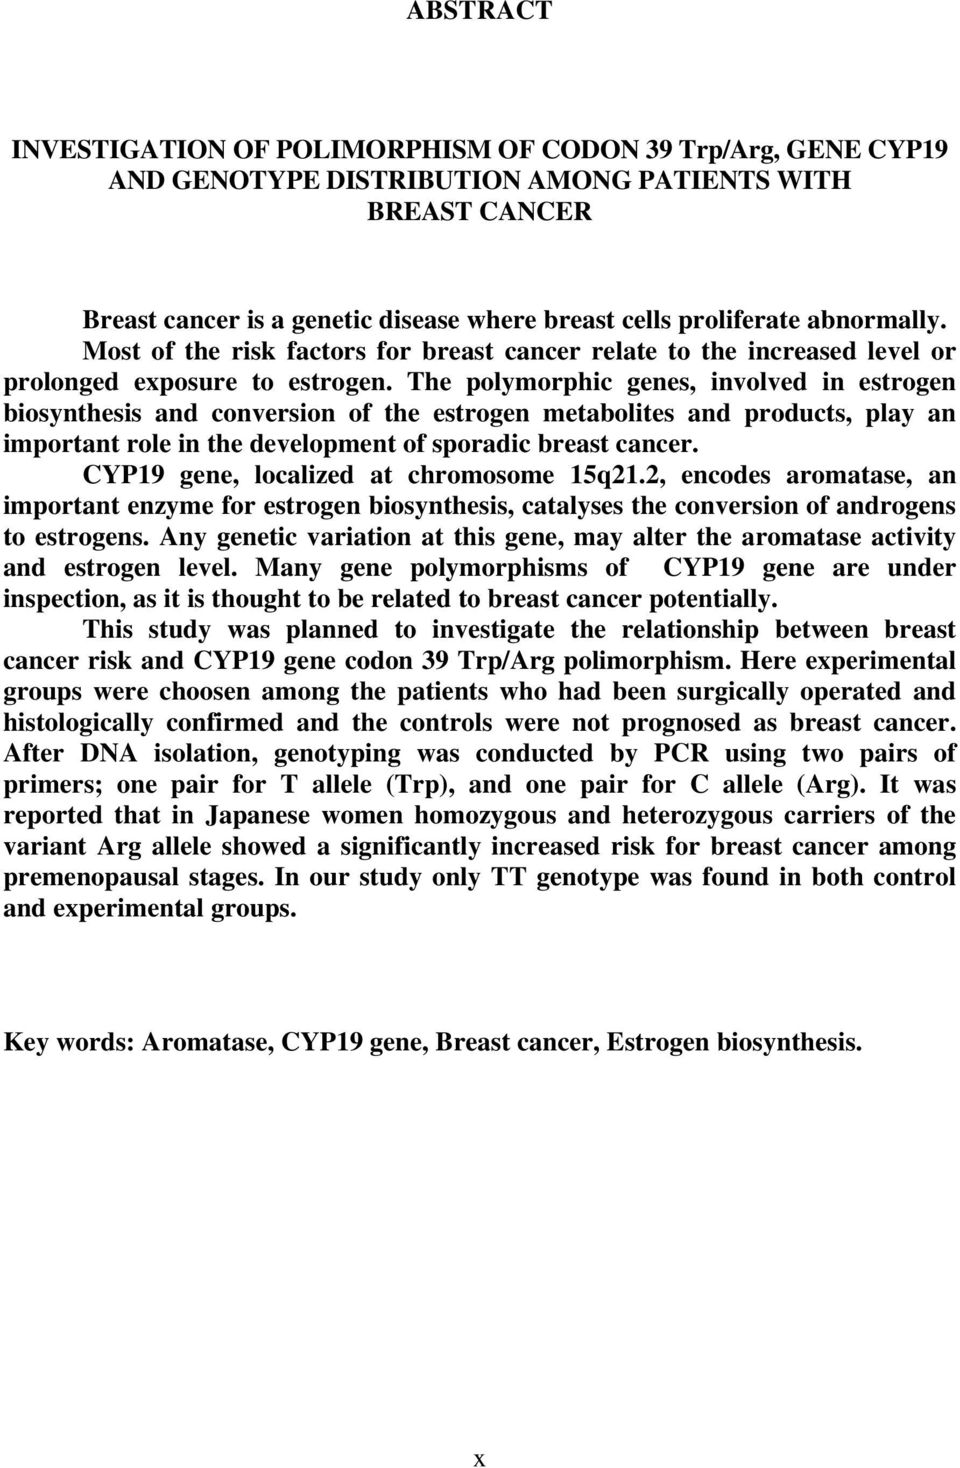 The polymorphic genes, involved in estrogen biosynthesis and conversion of the estrogen metabolites and products, play an important role in the development of sporadic breast cancer.